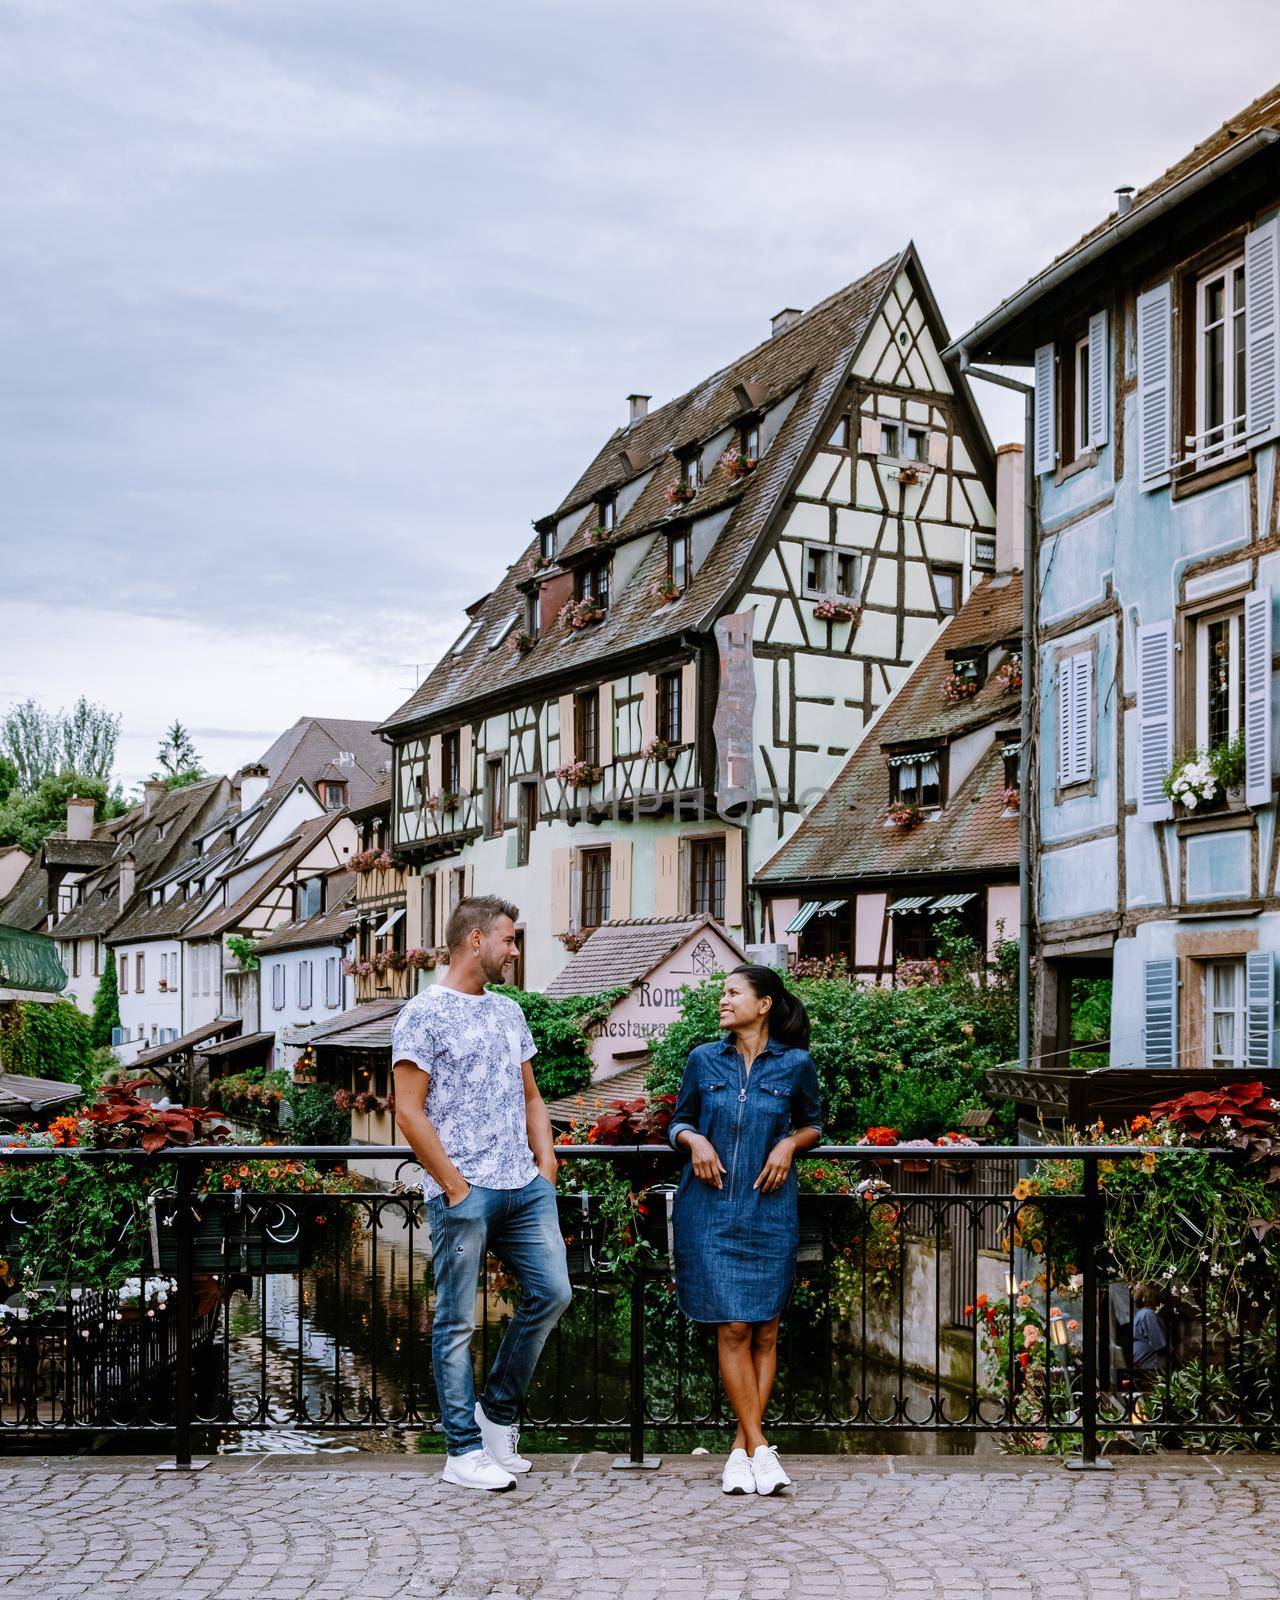 couple on city trip Colmar, Alsace, France. Petite Venice, water canal and traditional half timbered houses. Colmar is a charming town in Alsace, France. Beautiful view of colorful romantic city Colmar, France, Alsace by fokkebok